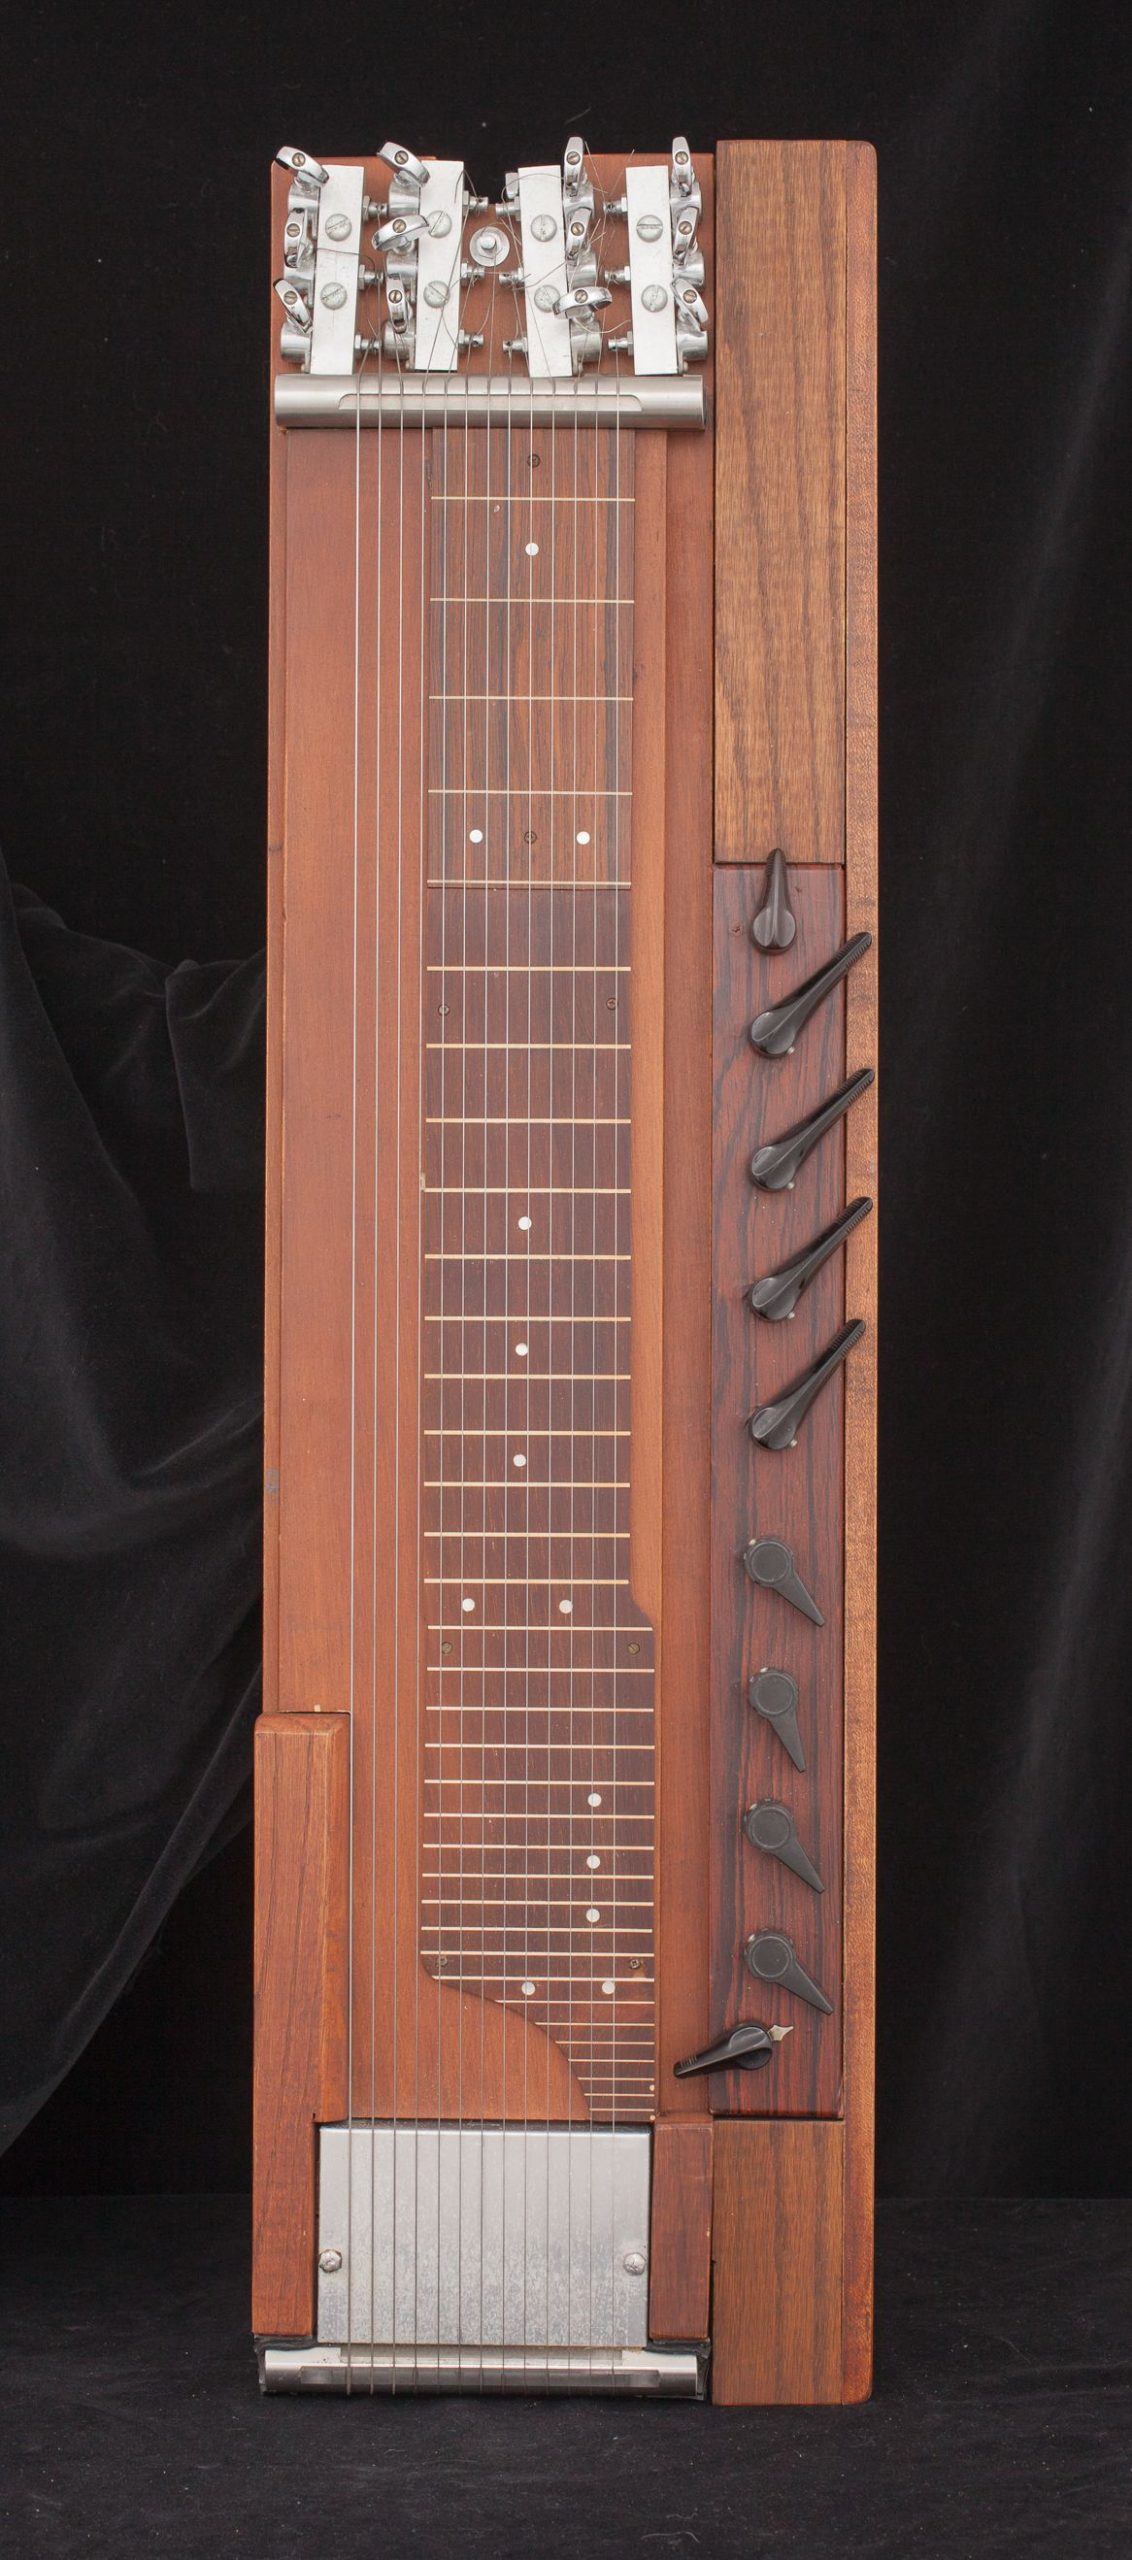 Rectangular experimental guitar made of wood. Right side has 10 levers, there are 12 strings in the center, and a metal plate at the bottom.